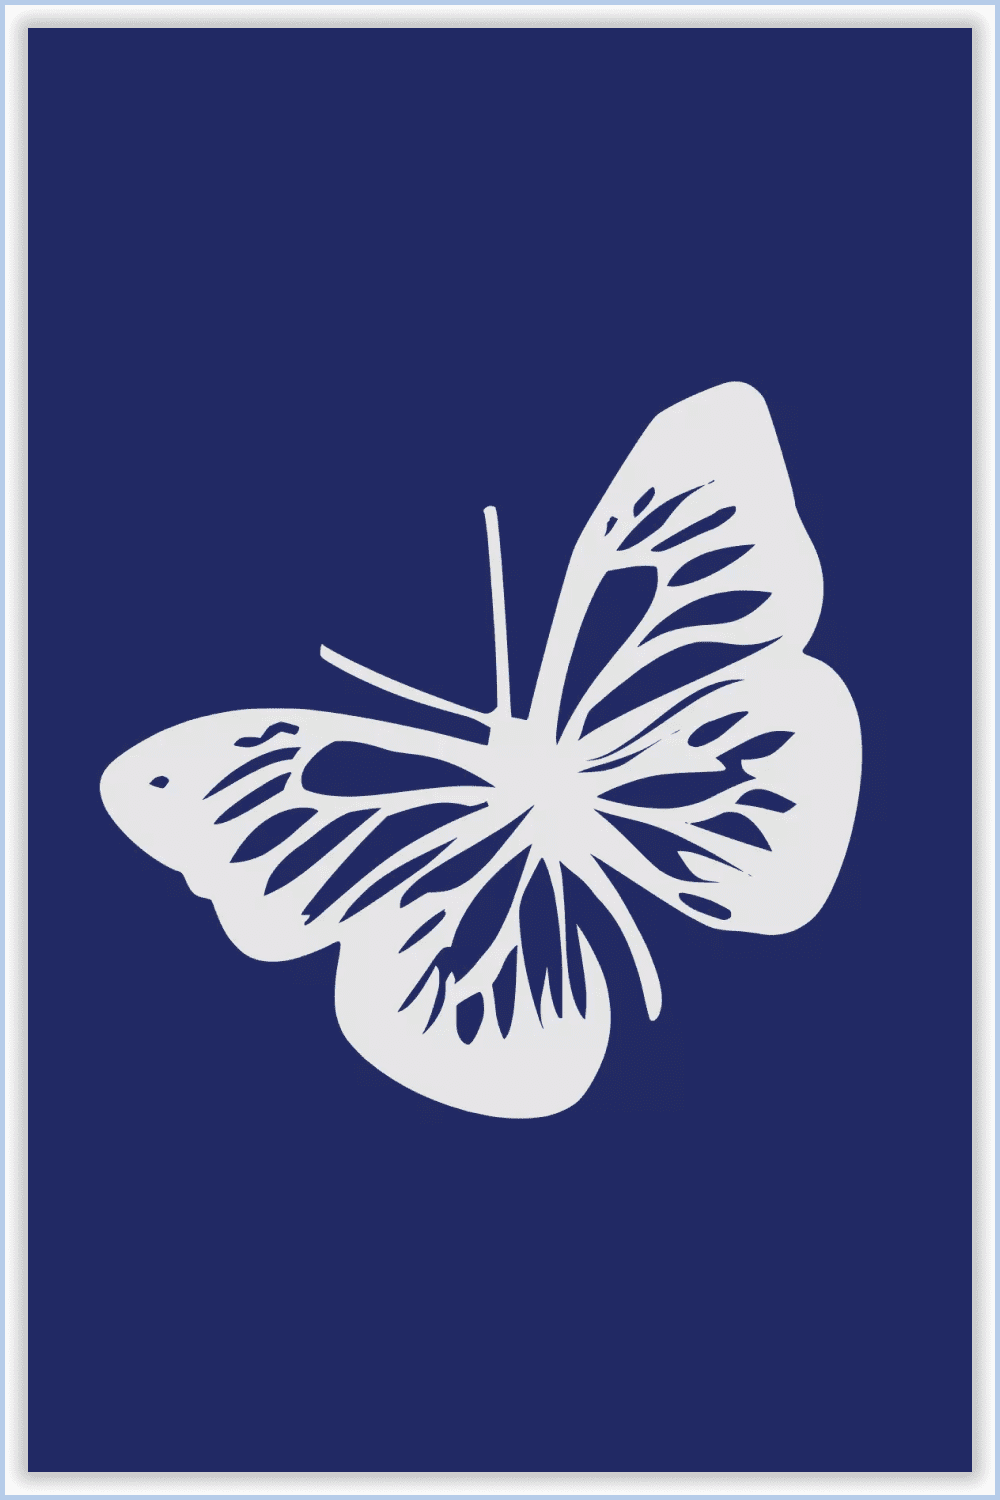 White butterfly drawn in thick lines on a blue background.